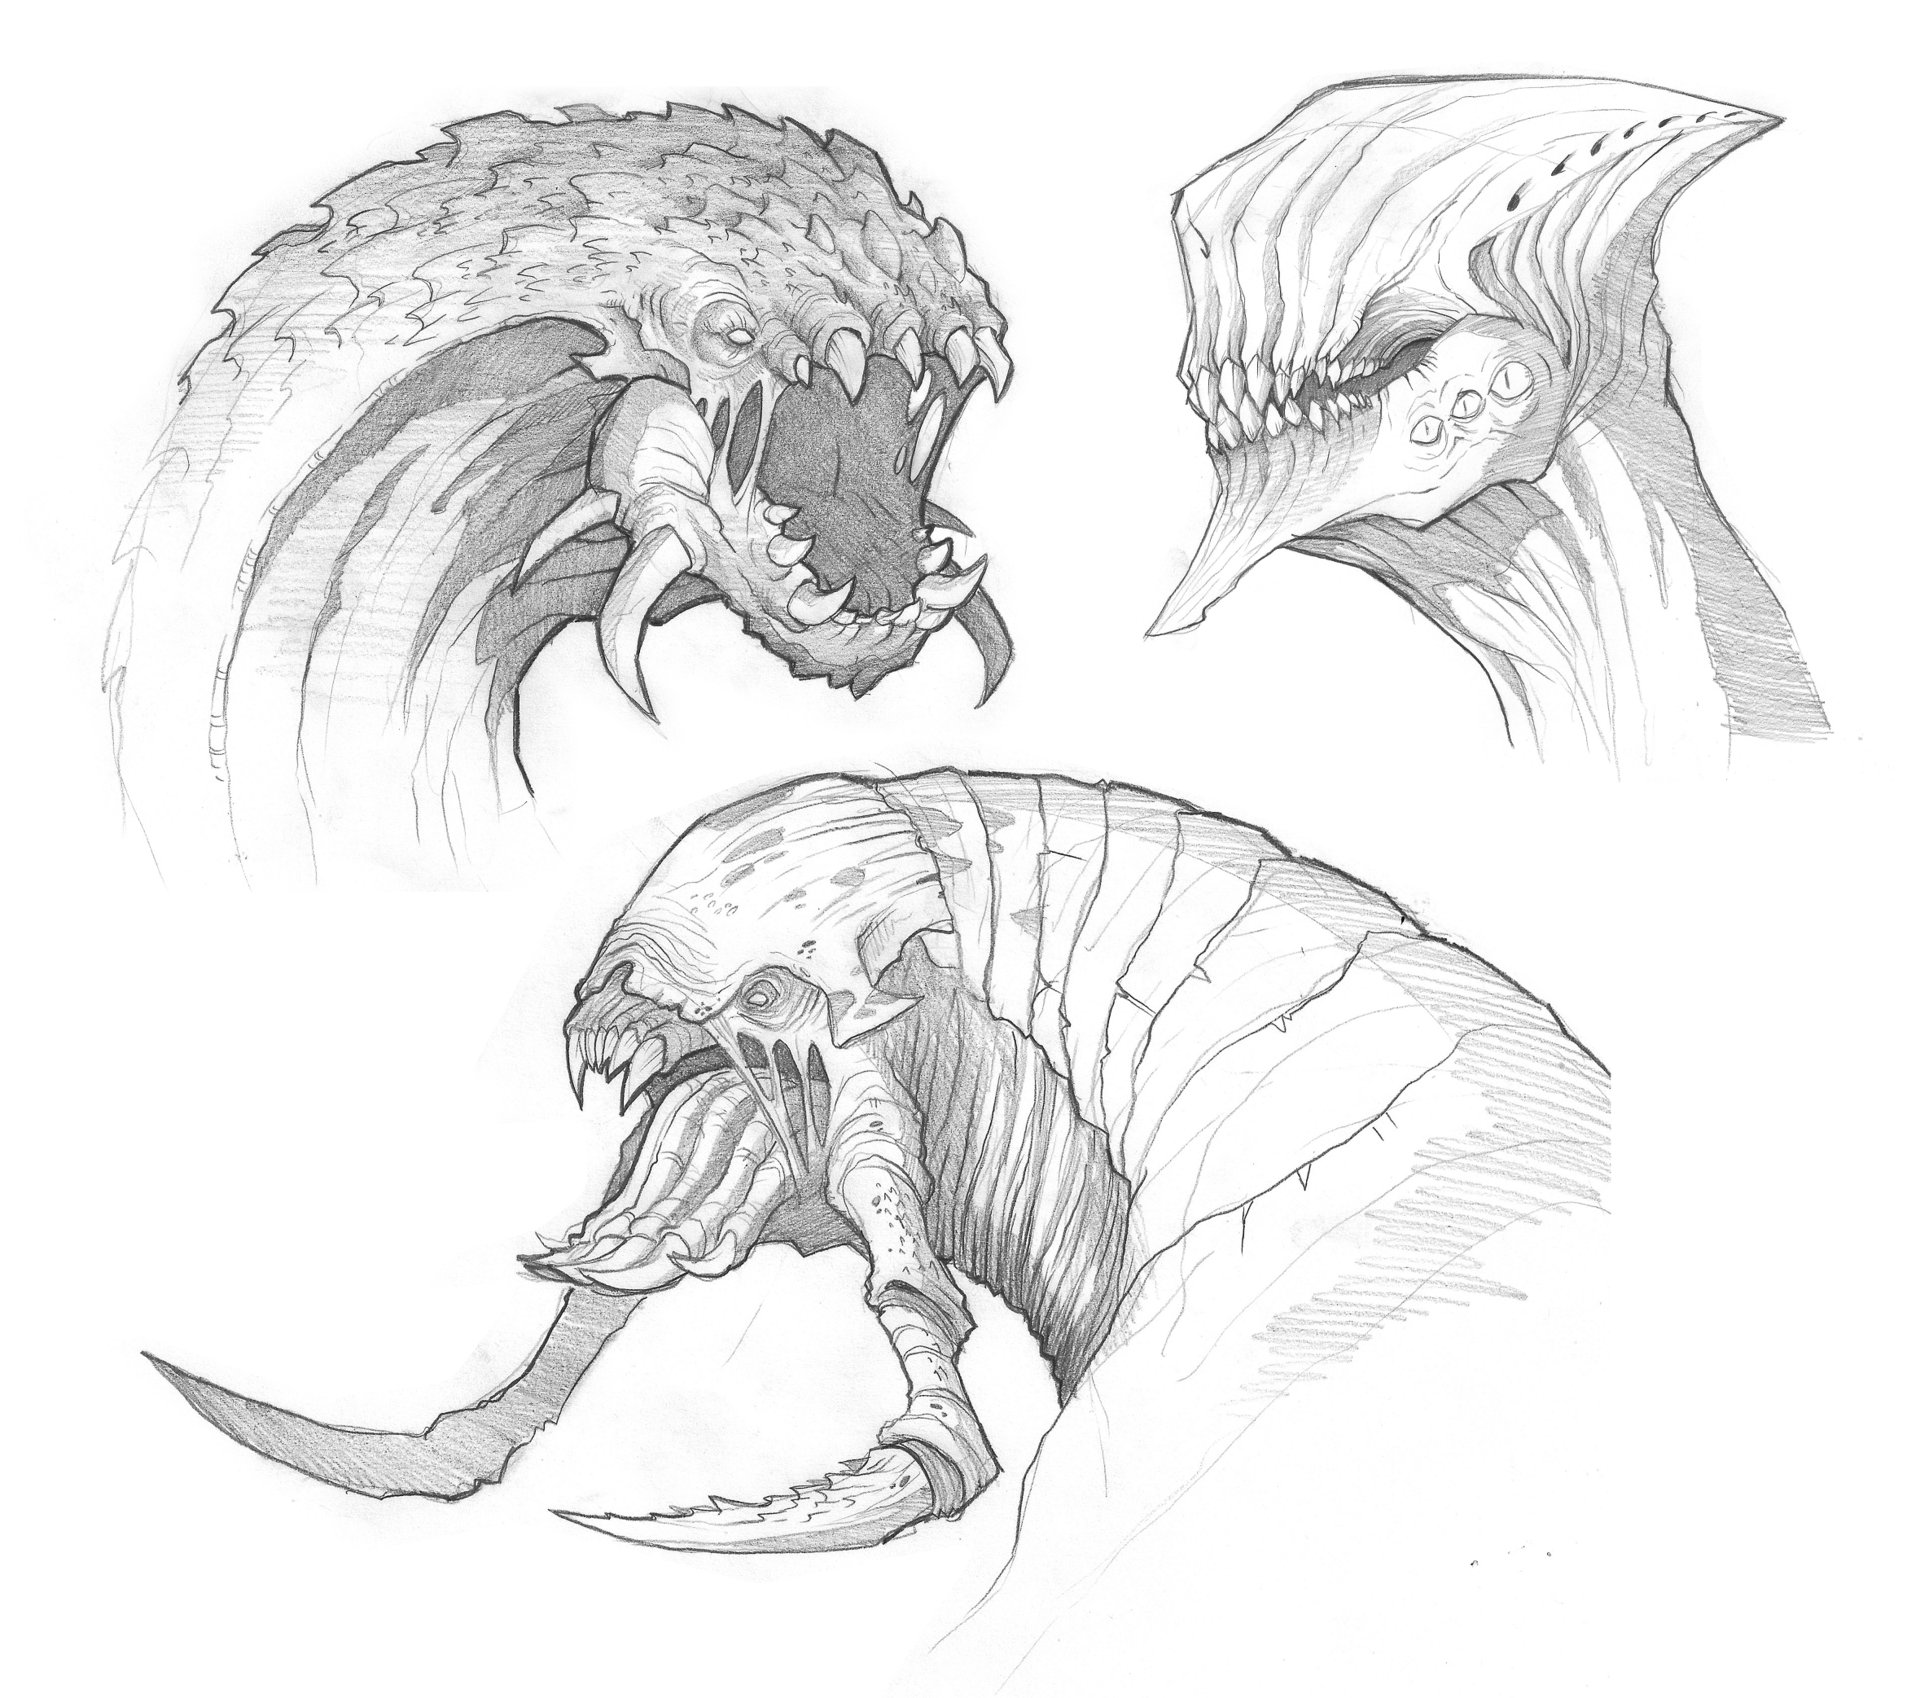 How to Use Gestures to Draw Creatures From Imagination  Envato Tuts